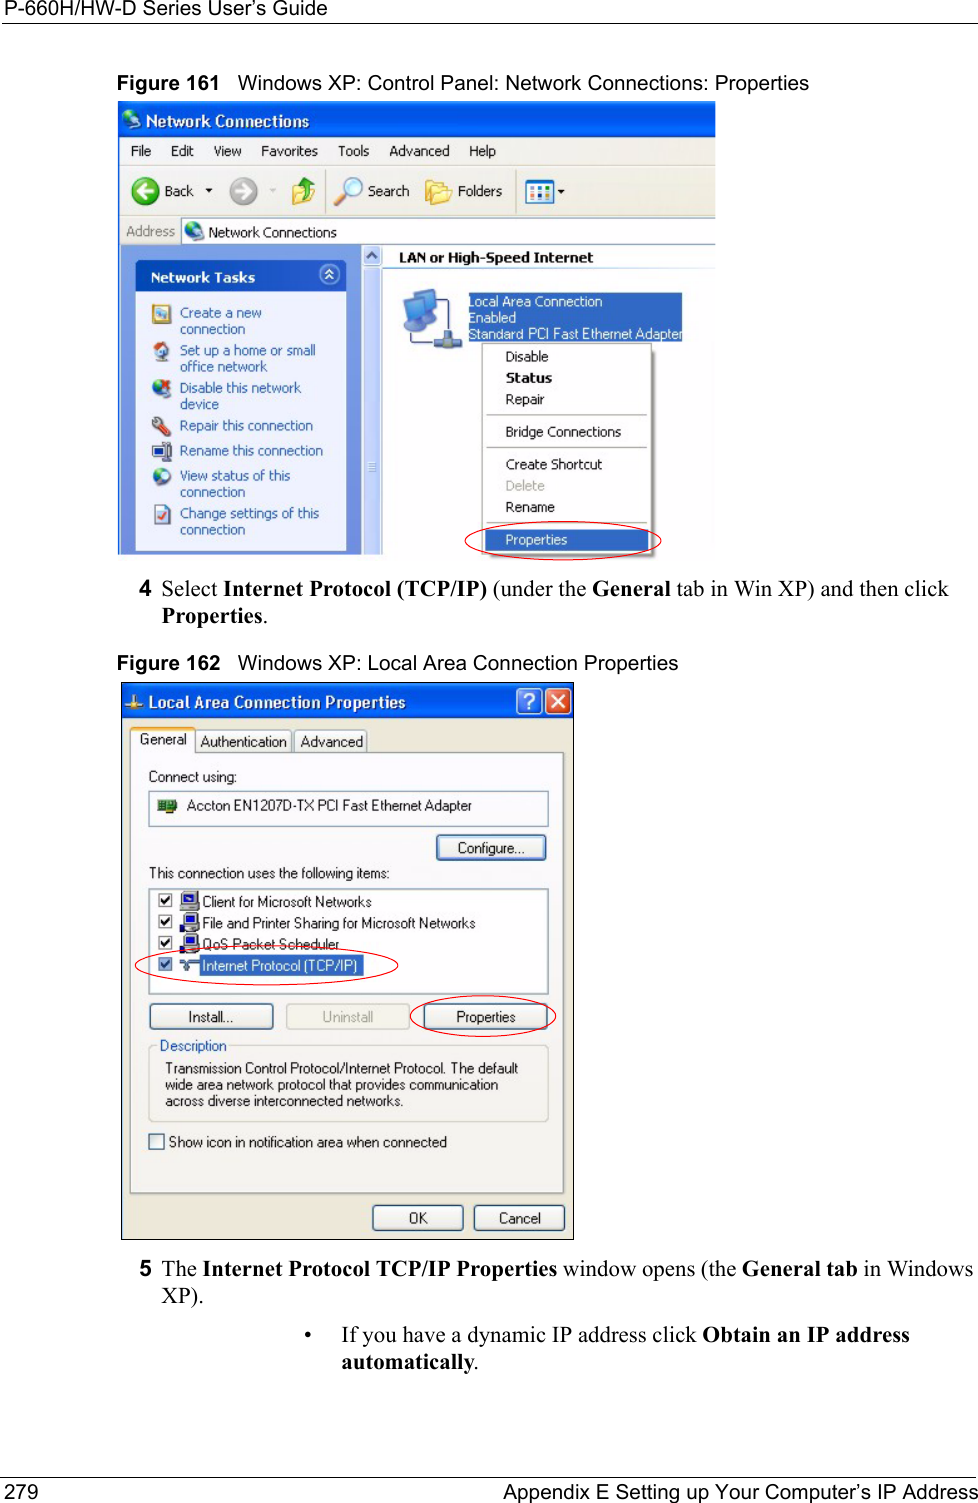 P-660H/HW-D Series User’s Guide279 Appendix E Setting up Your Computer’s IP AddressFigure 161   Windows XP: Control Panel: Network Connections: Properties4Select Internet Protocol (TCP/IP) (under the General tab in Win XP) and then click Properties.Figure 162   Windows XP: Local Area Connection Properties5The Internet Protocol TCP/IP Properties window opens (the General tab in Windows XP).• If you have a dynamic IP address click Obtain an IP address automatically.